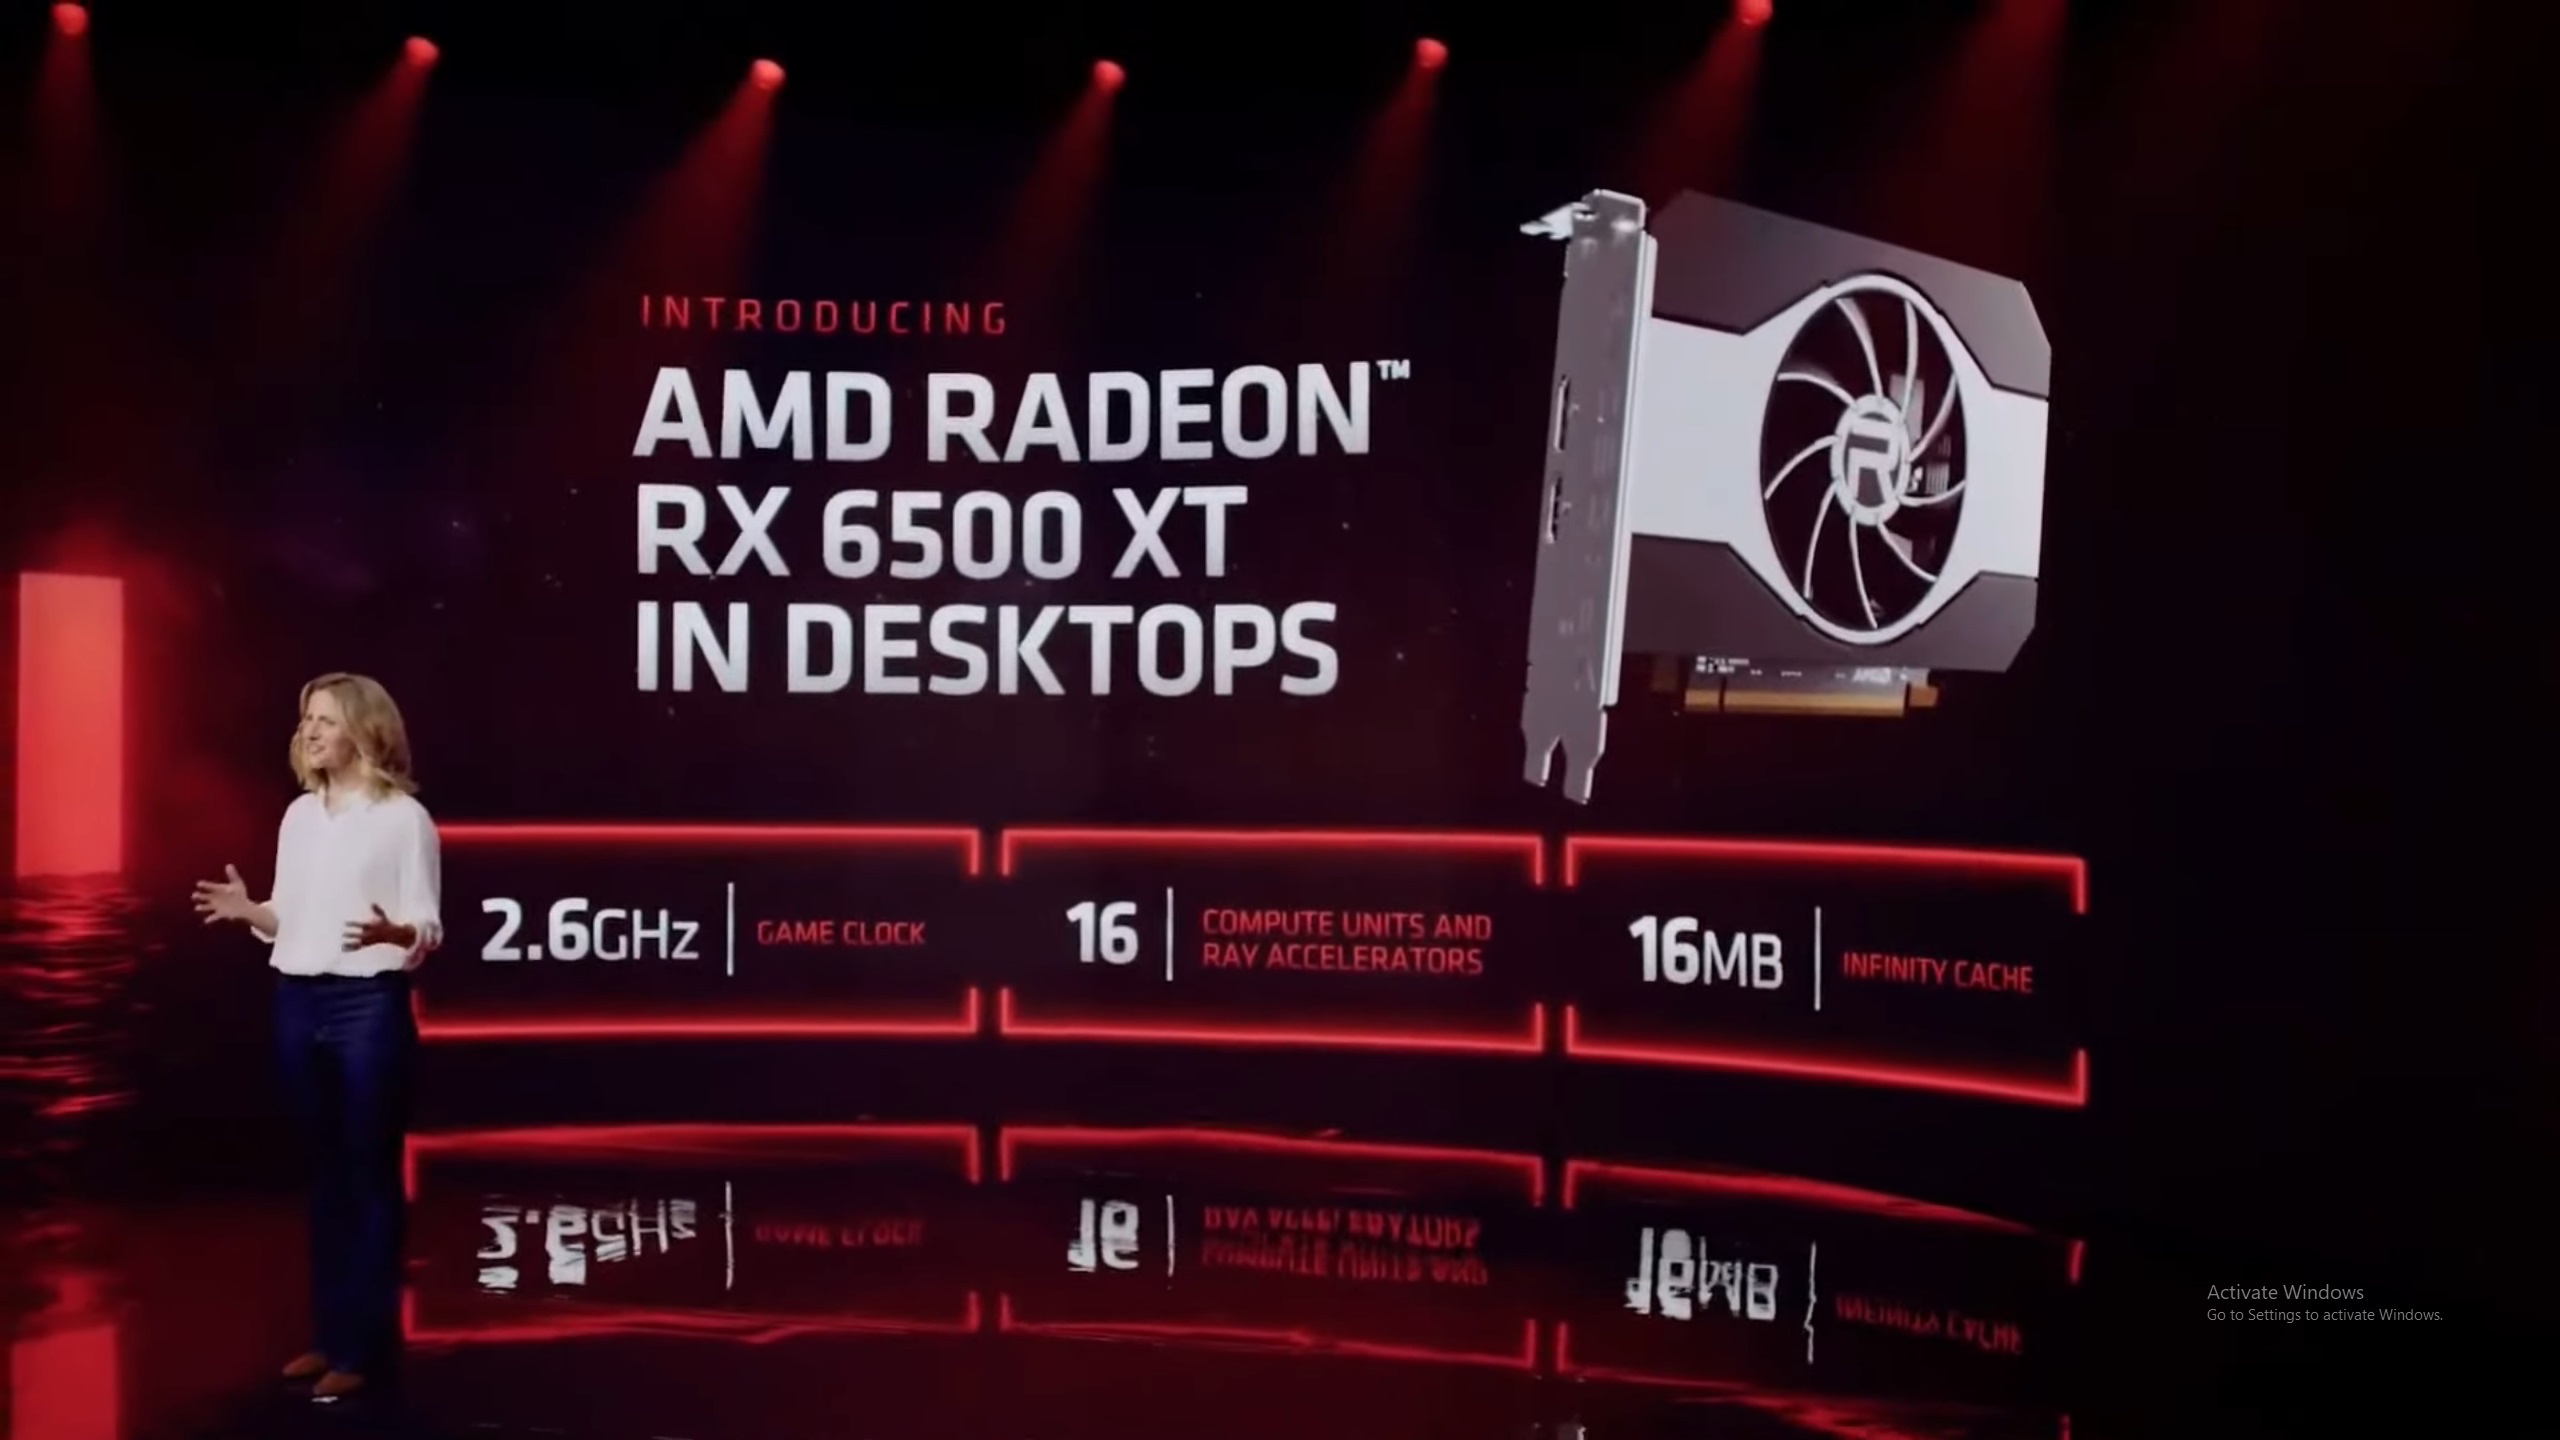 AMD Launches AMD Radeon RX 6500 XT and RX 6400 Graphics Cards